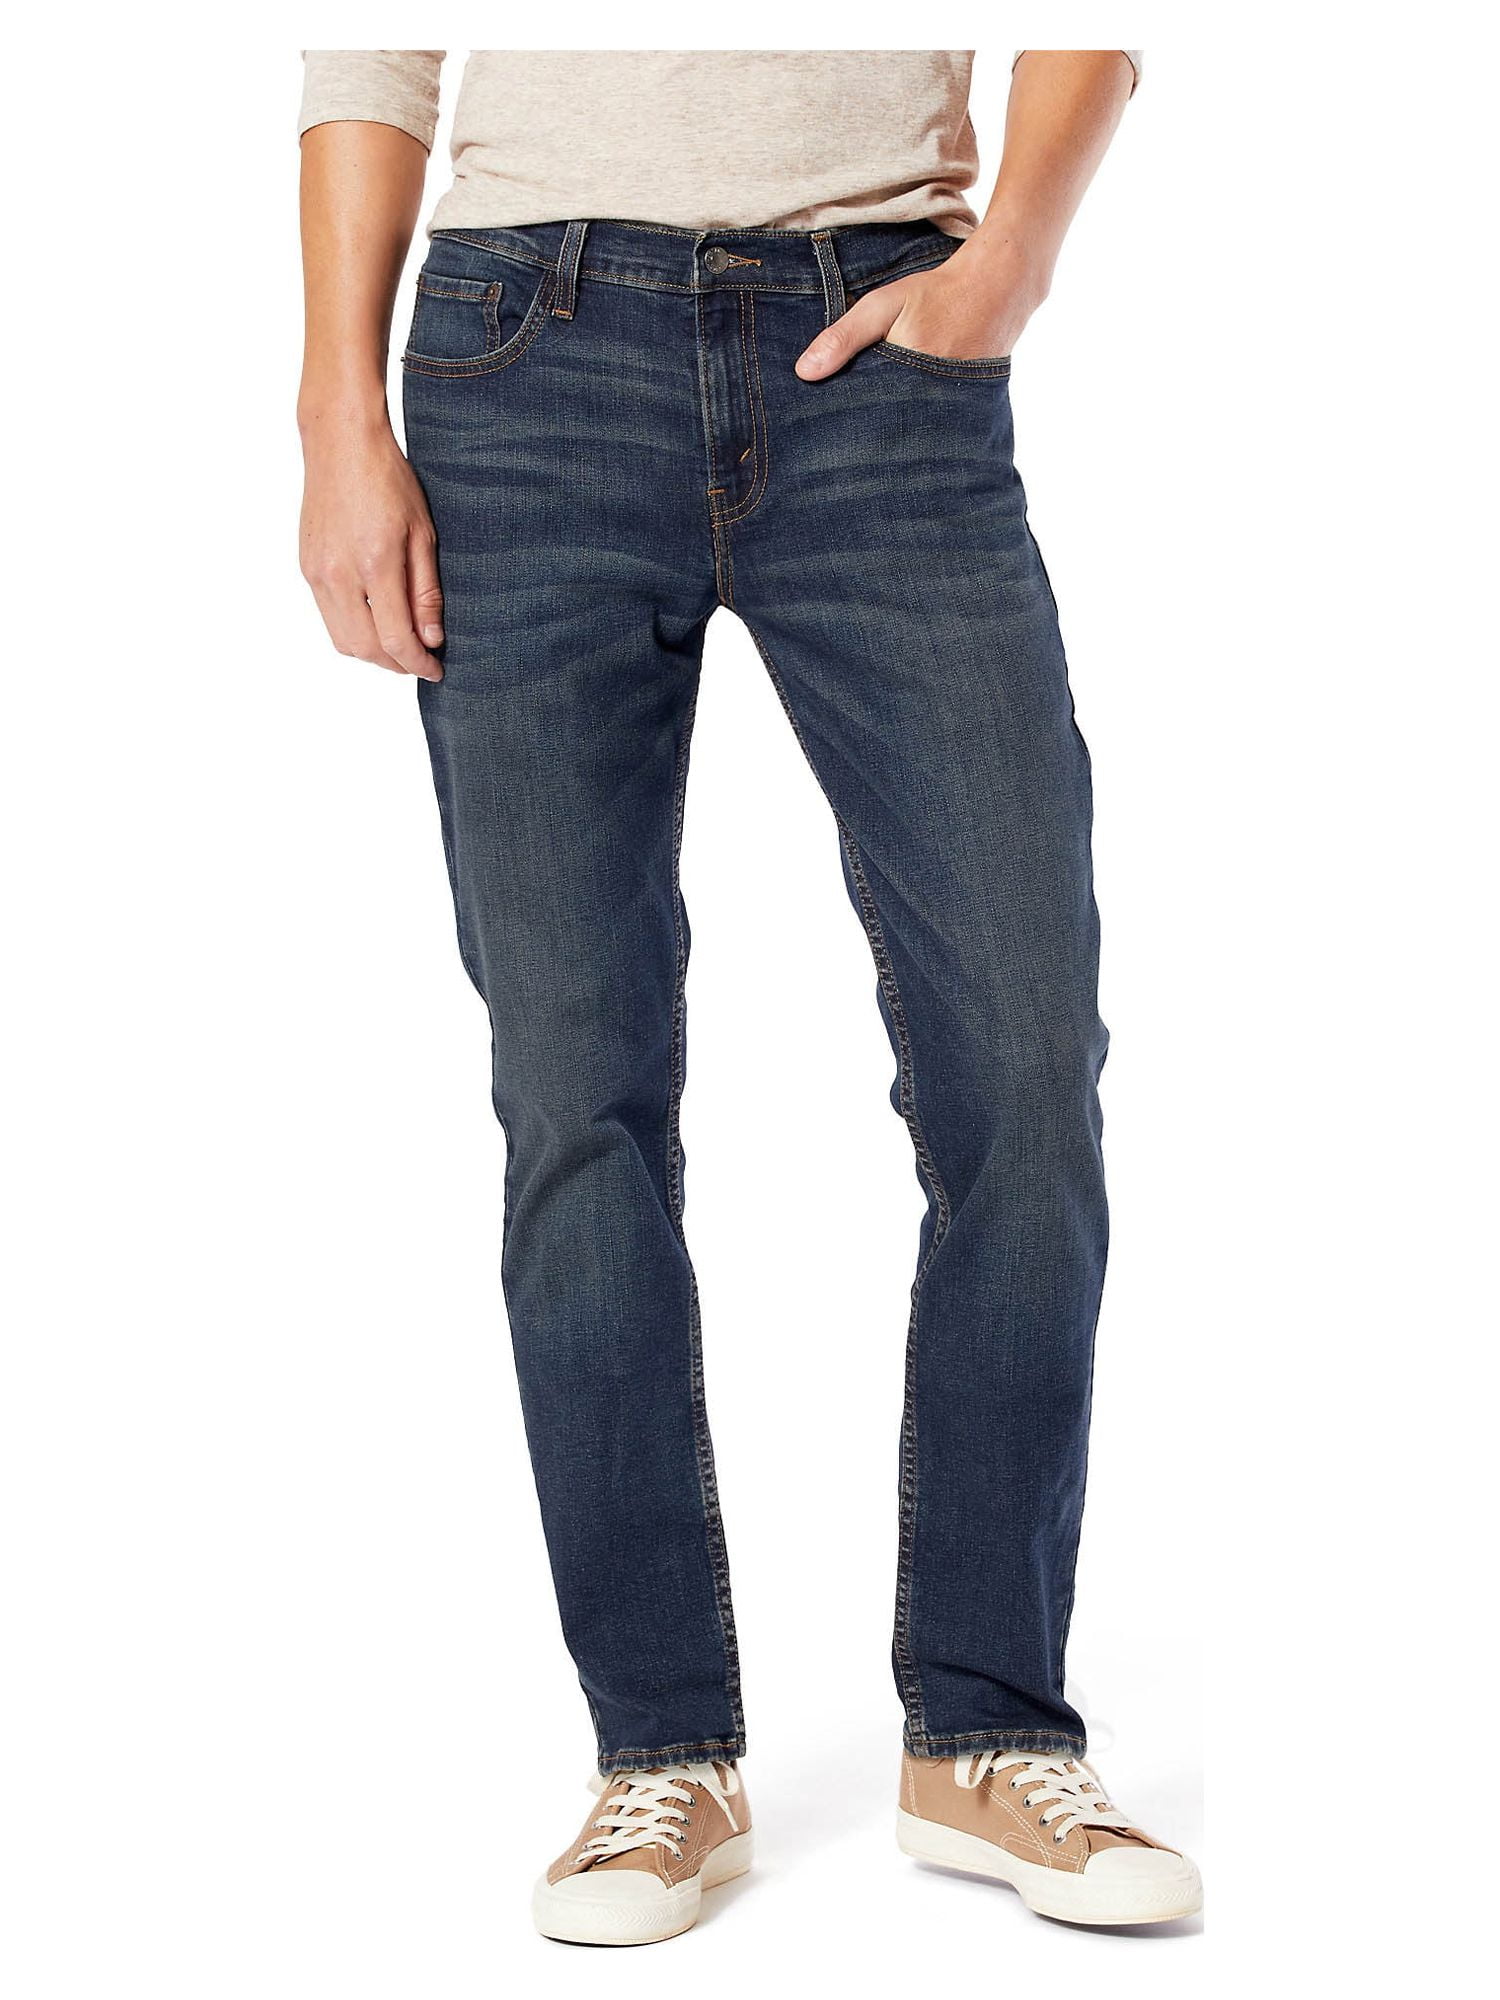 Signature by Levi Strauss & Co. Men's and Big Men's Slim Fit Jeans ...